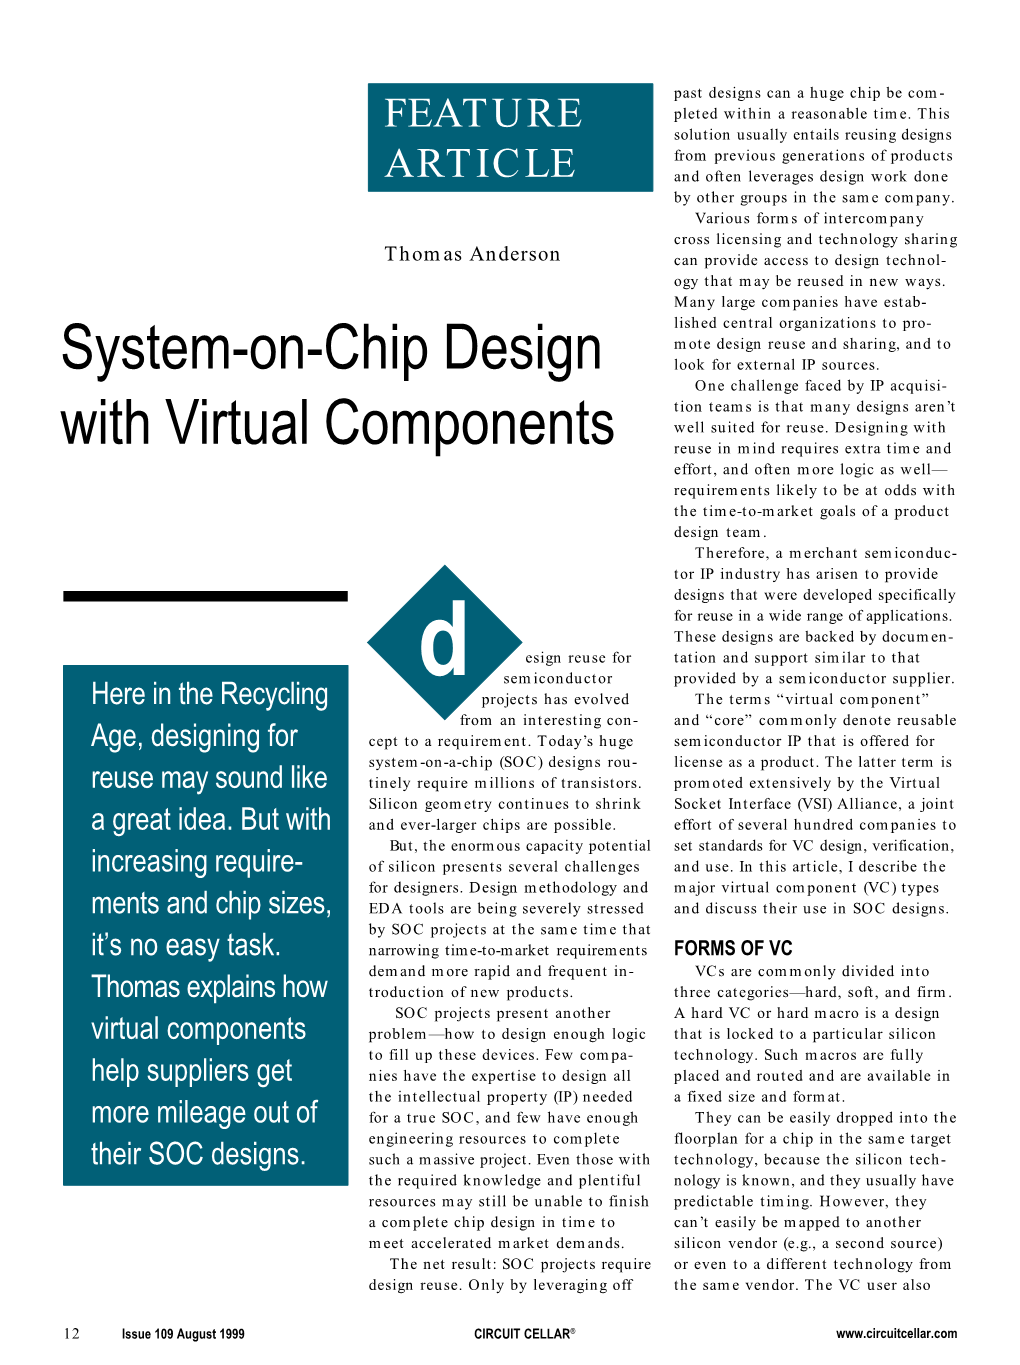 System-On-Chip Design with Virtual Components